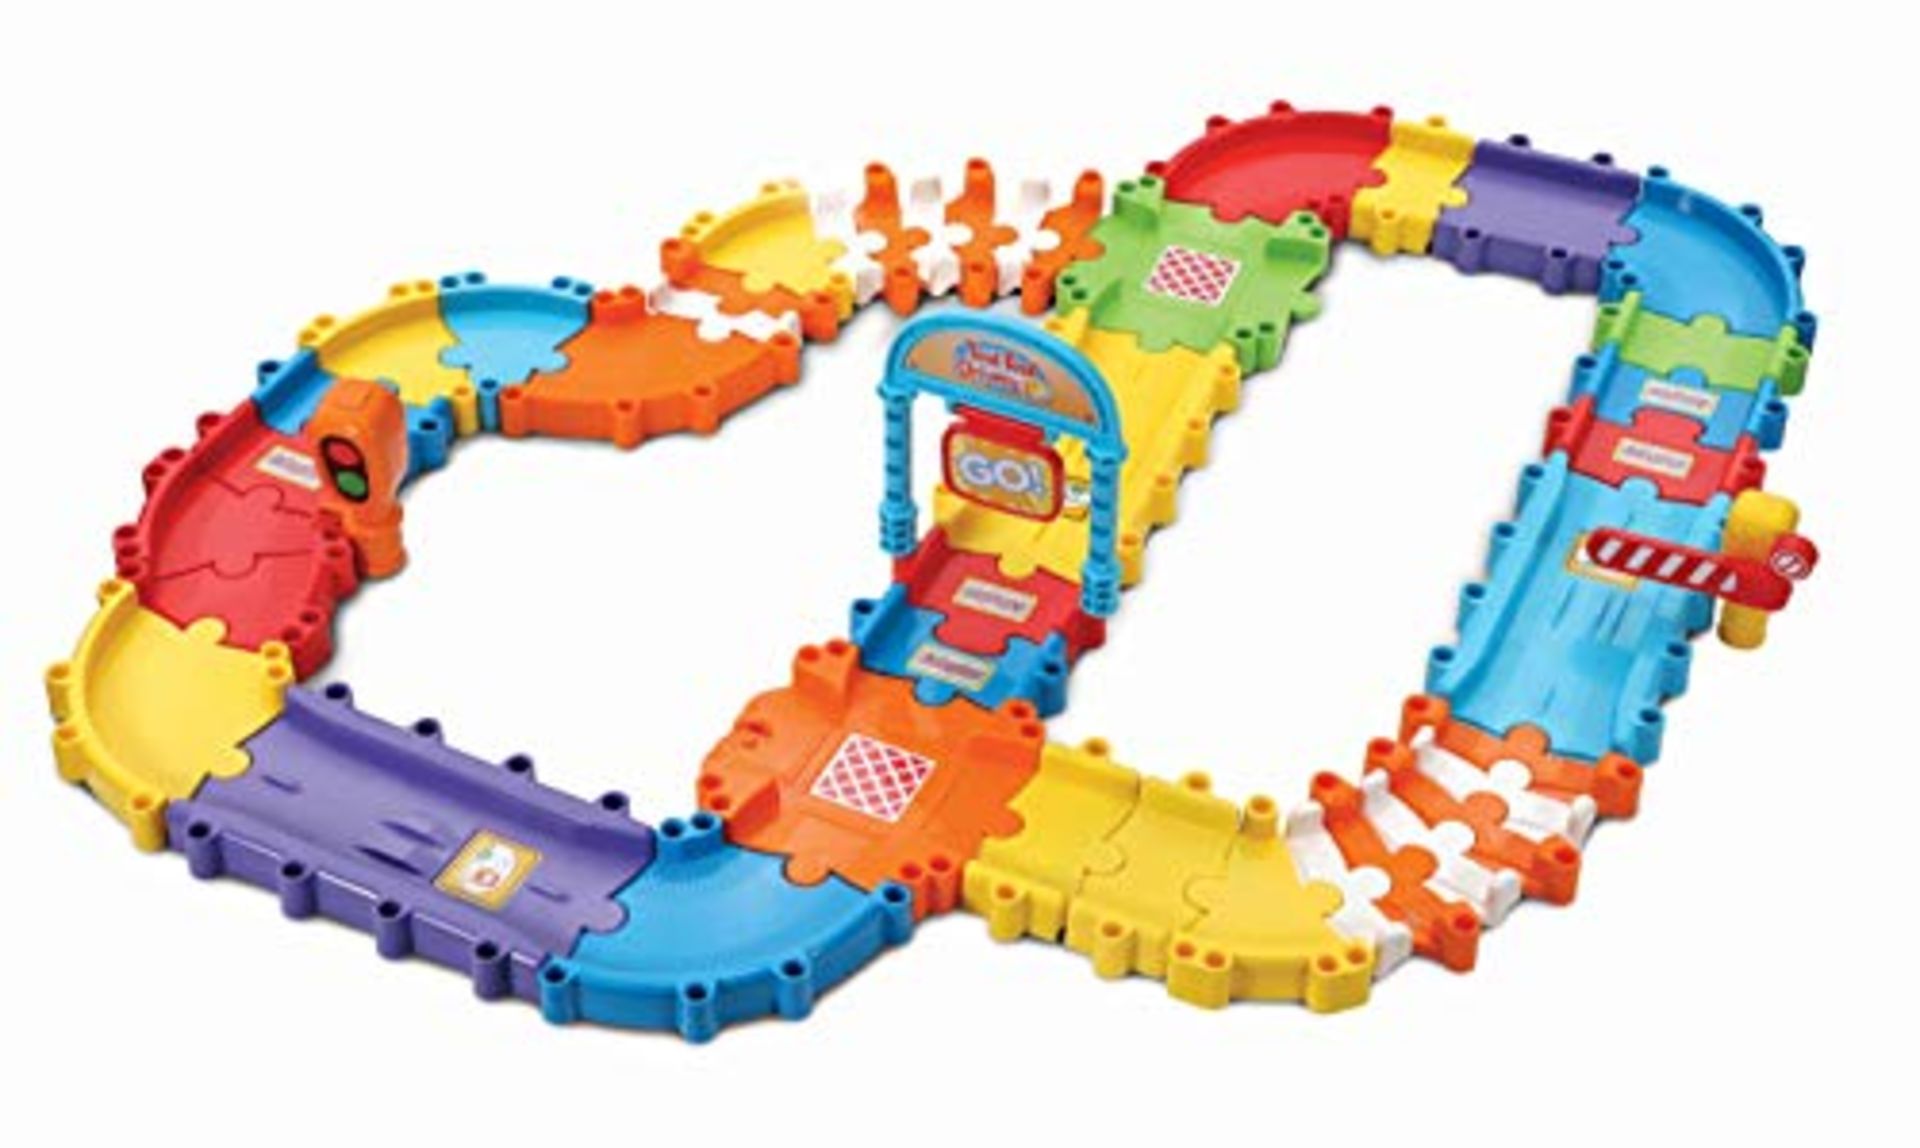 VTech Toot-Toot Drivers Track Set, First Kid's Car Set, Cars for Boys and Girls, Suita